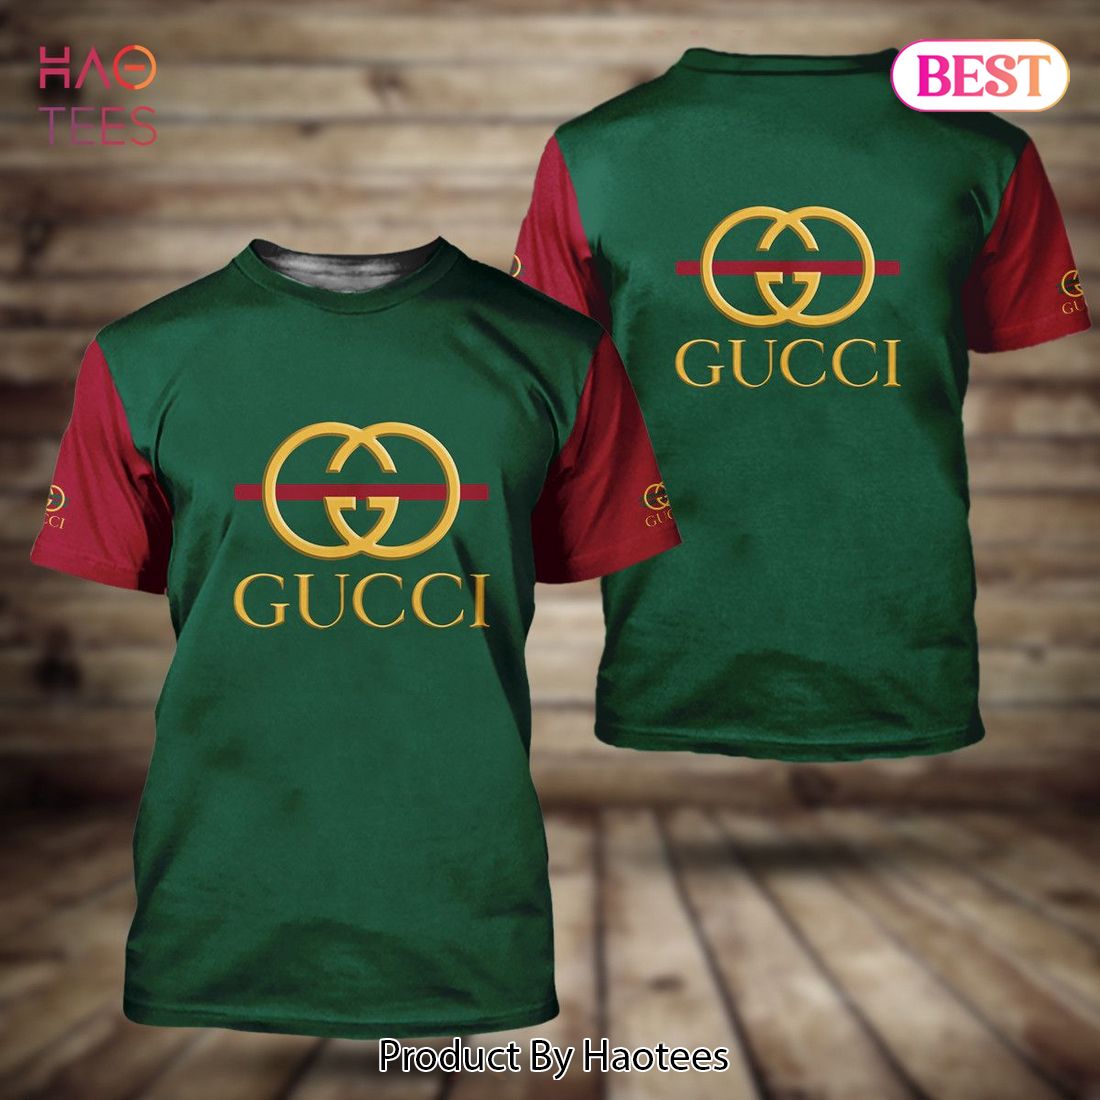 HOT Gucci Green Color Mix Red Sleeve 3D T-Shirt Limited Edition